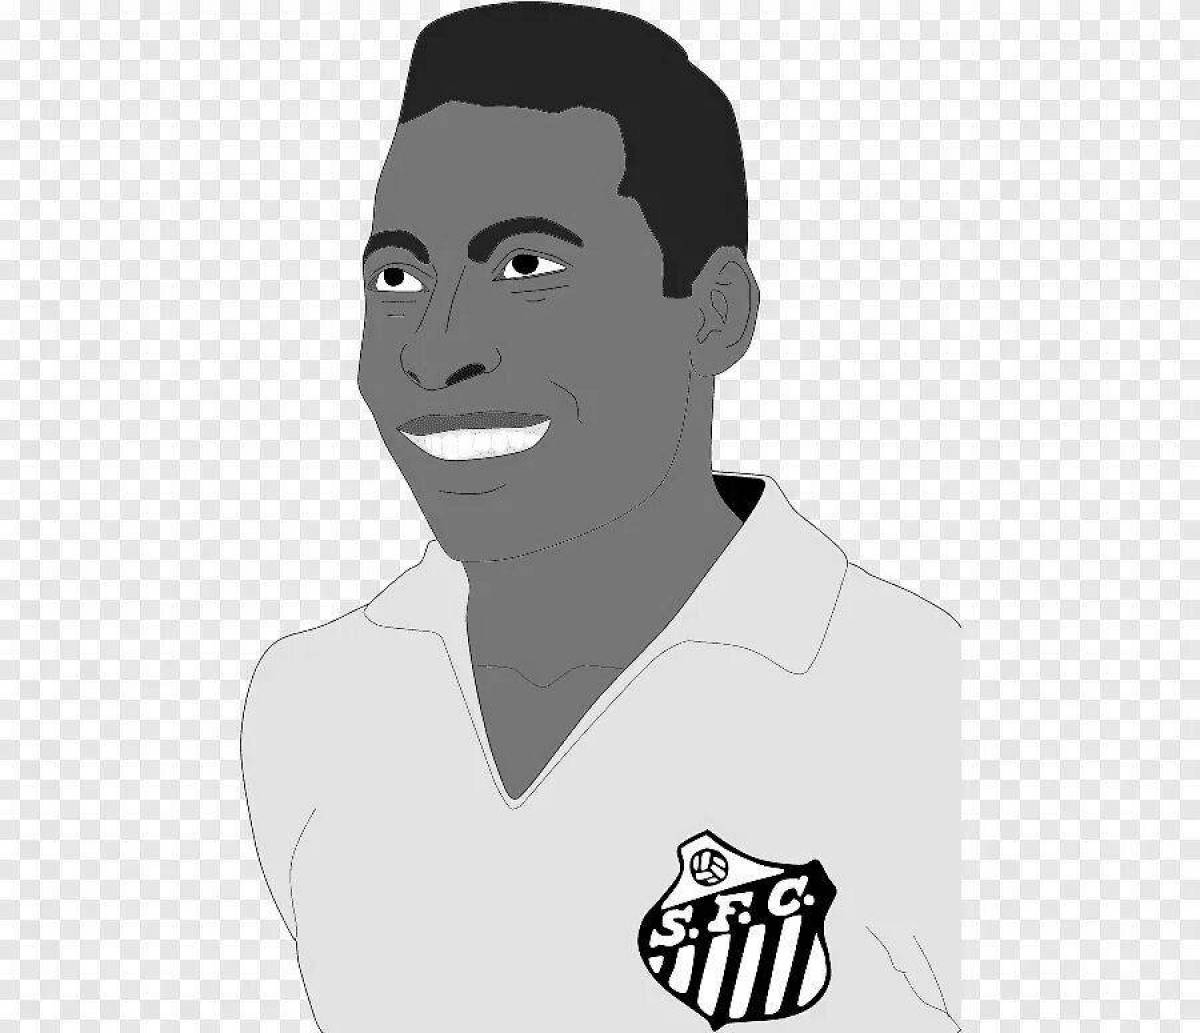 Pele's playful soccer player coloring page